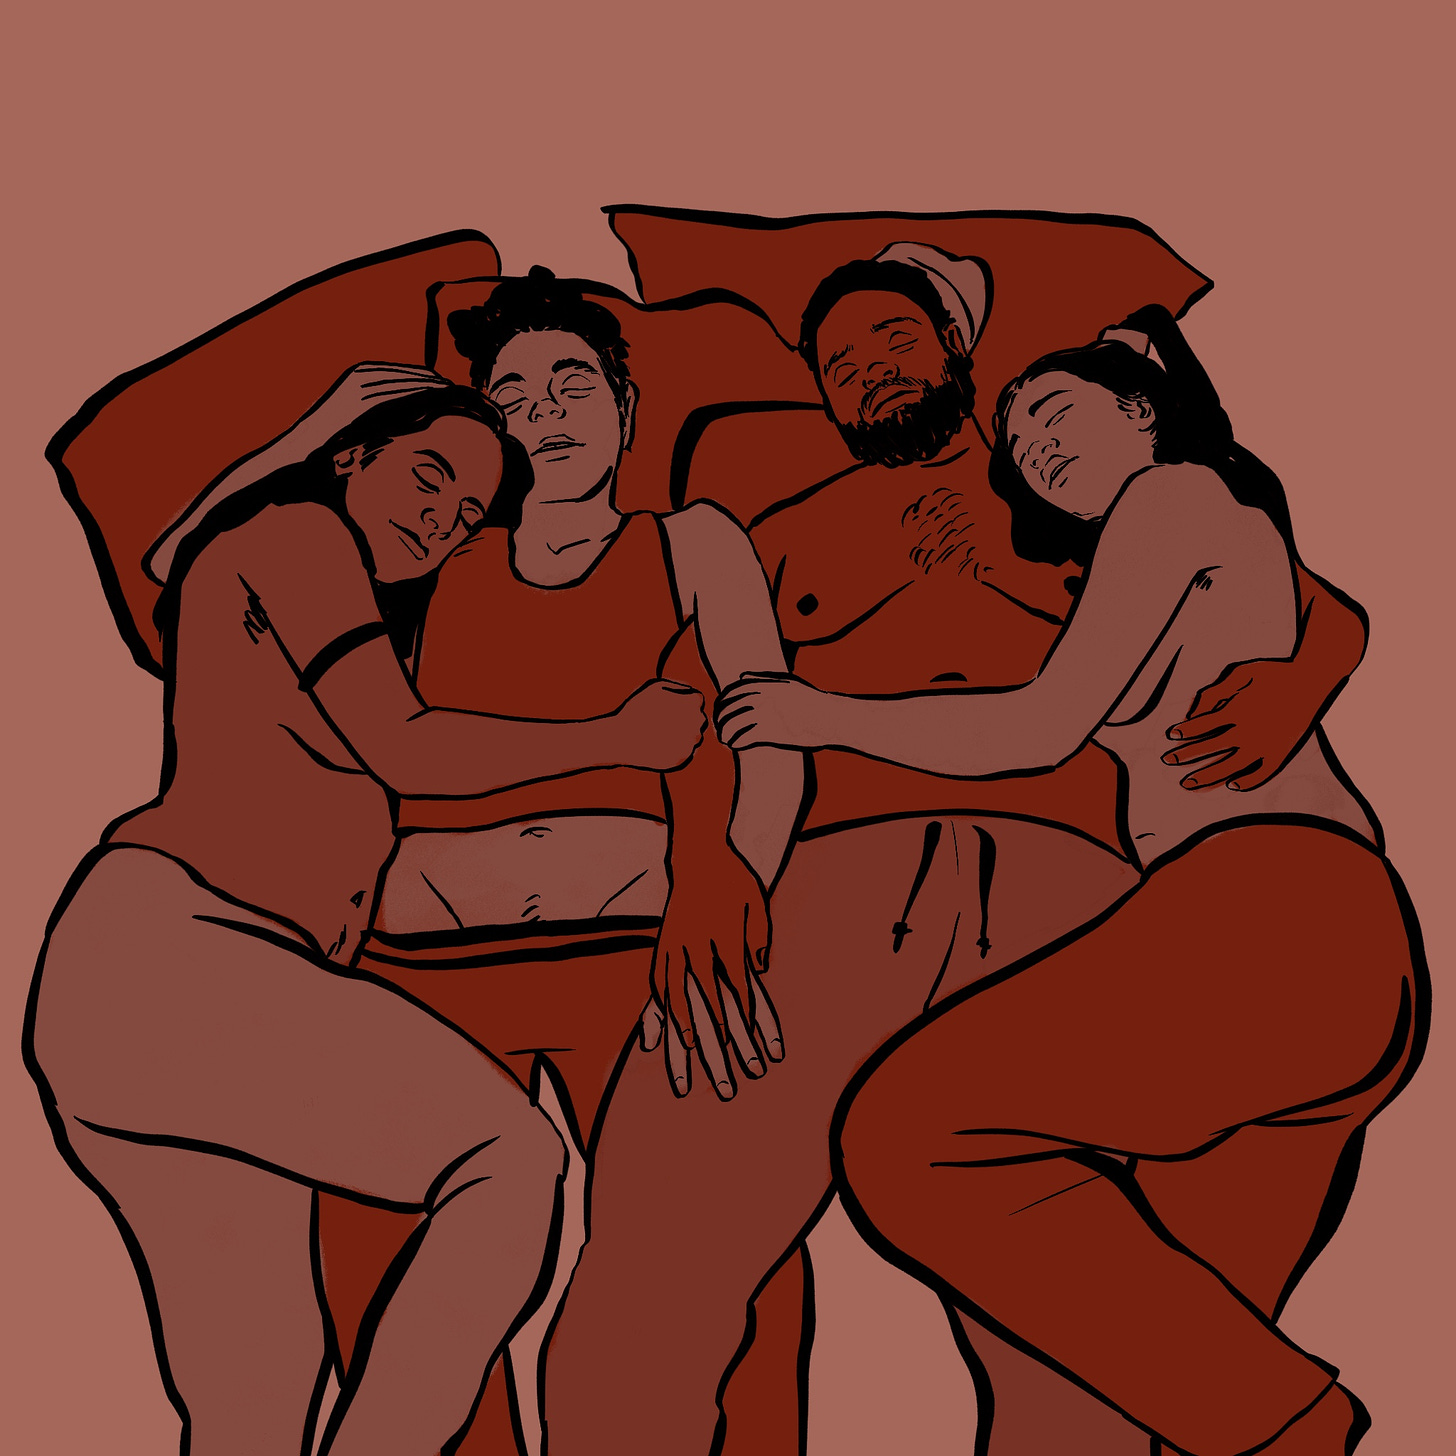 Archie, Jim, Oluwande, and Zheng in a polycule cuddle puddle.